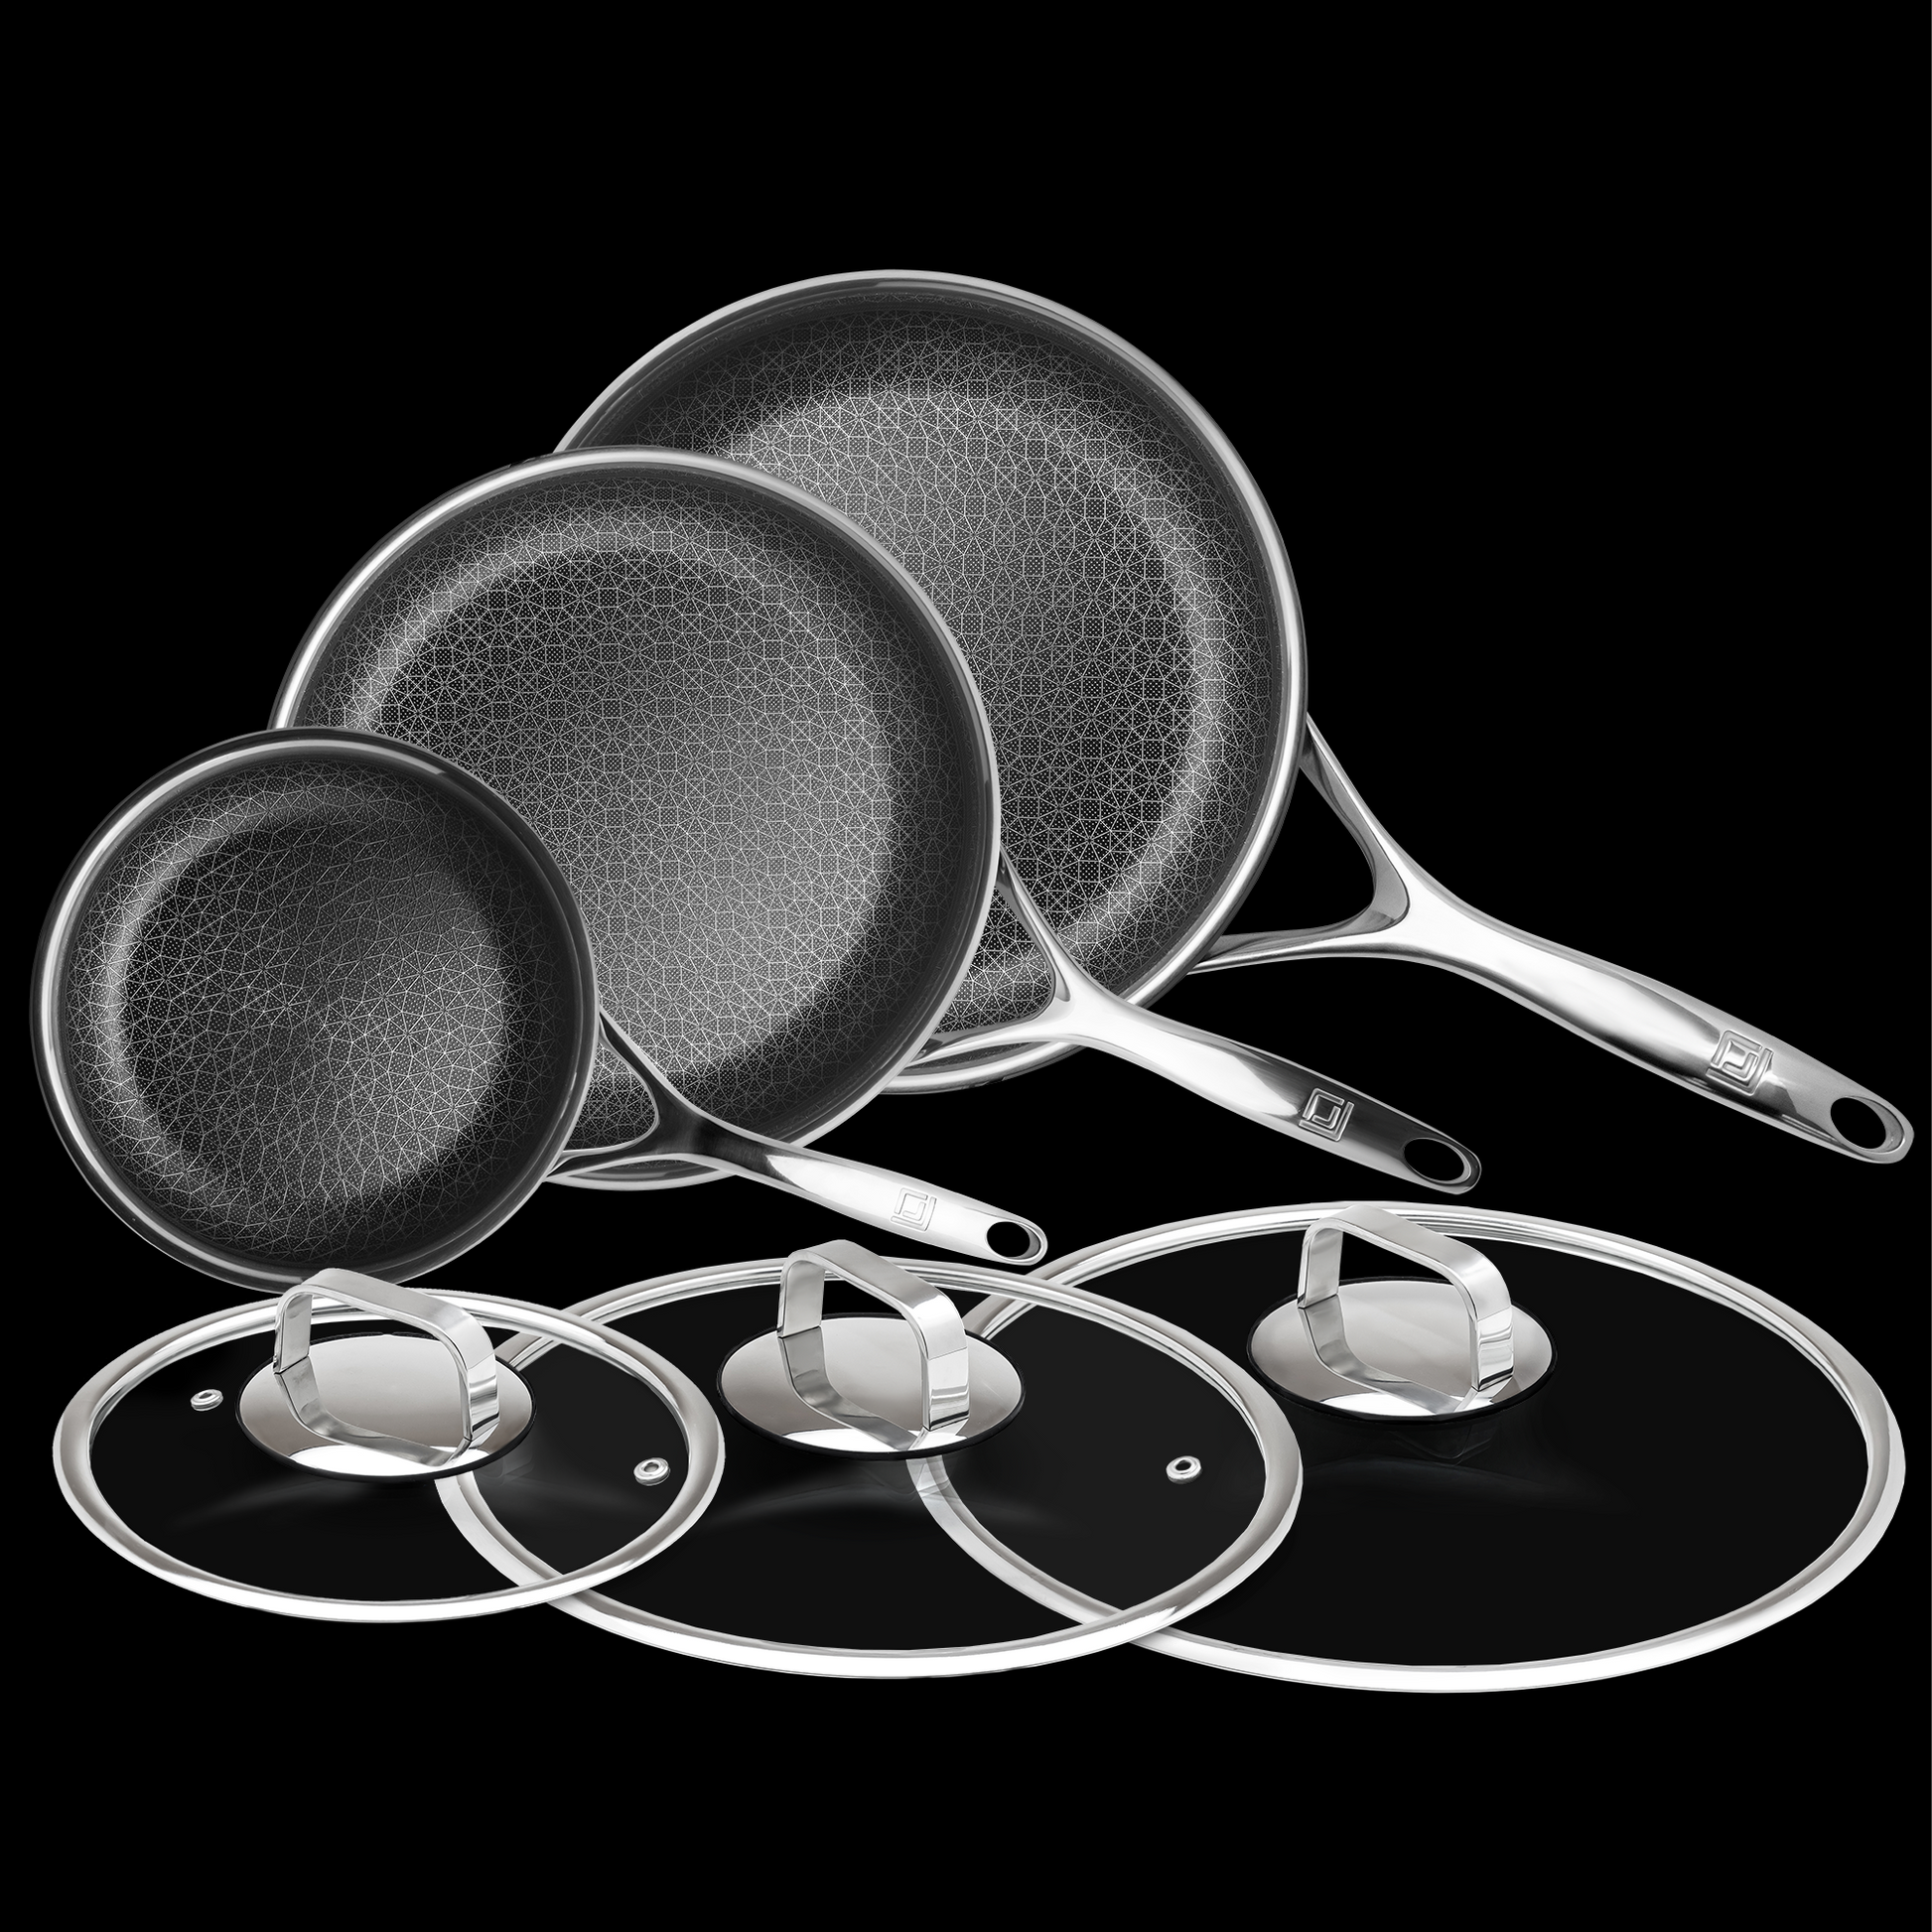 DiamondClad by Livwell 12 Hybrid Nonstick Wok Set with Tempered